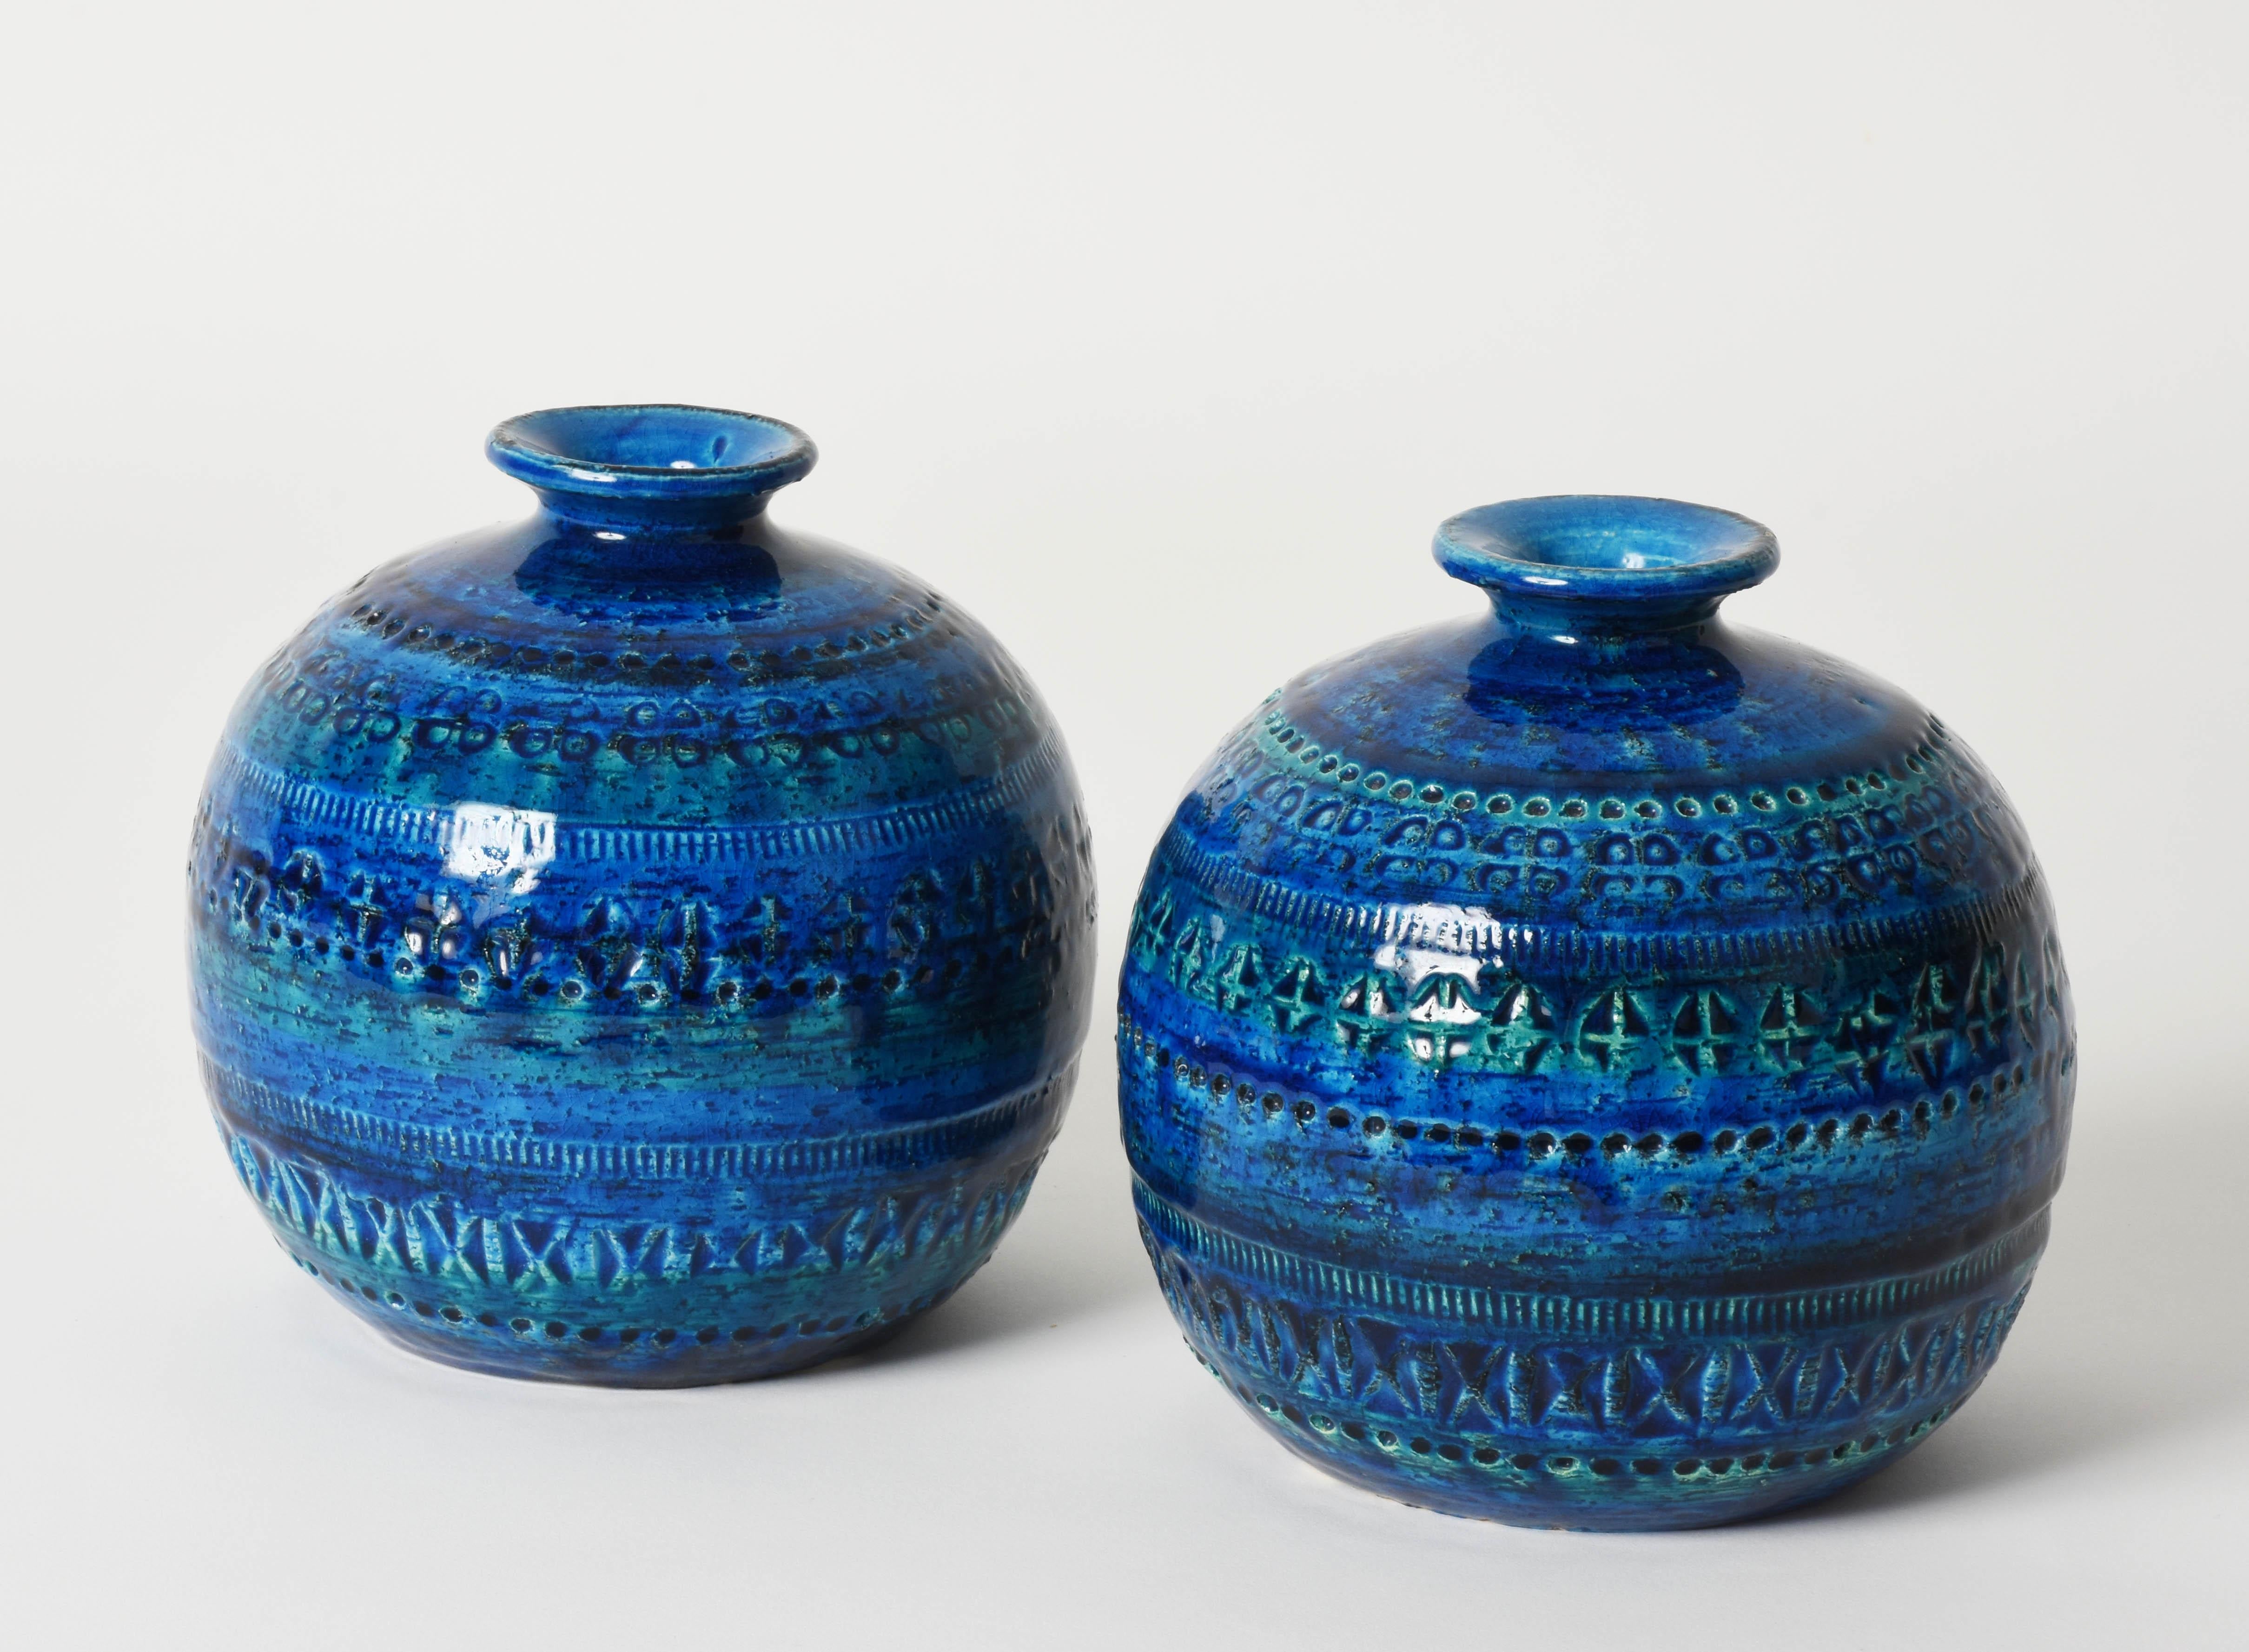 Pair of sphere-shaped terracotta ceramic Rimini blue vases for Bitossi. This magnificent set was designed by Aldo Londi in Italy during 1960s.

These pieces are wonderful thanks to the blue, green and turquoise terracotta ceramic glazed by hand